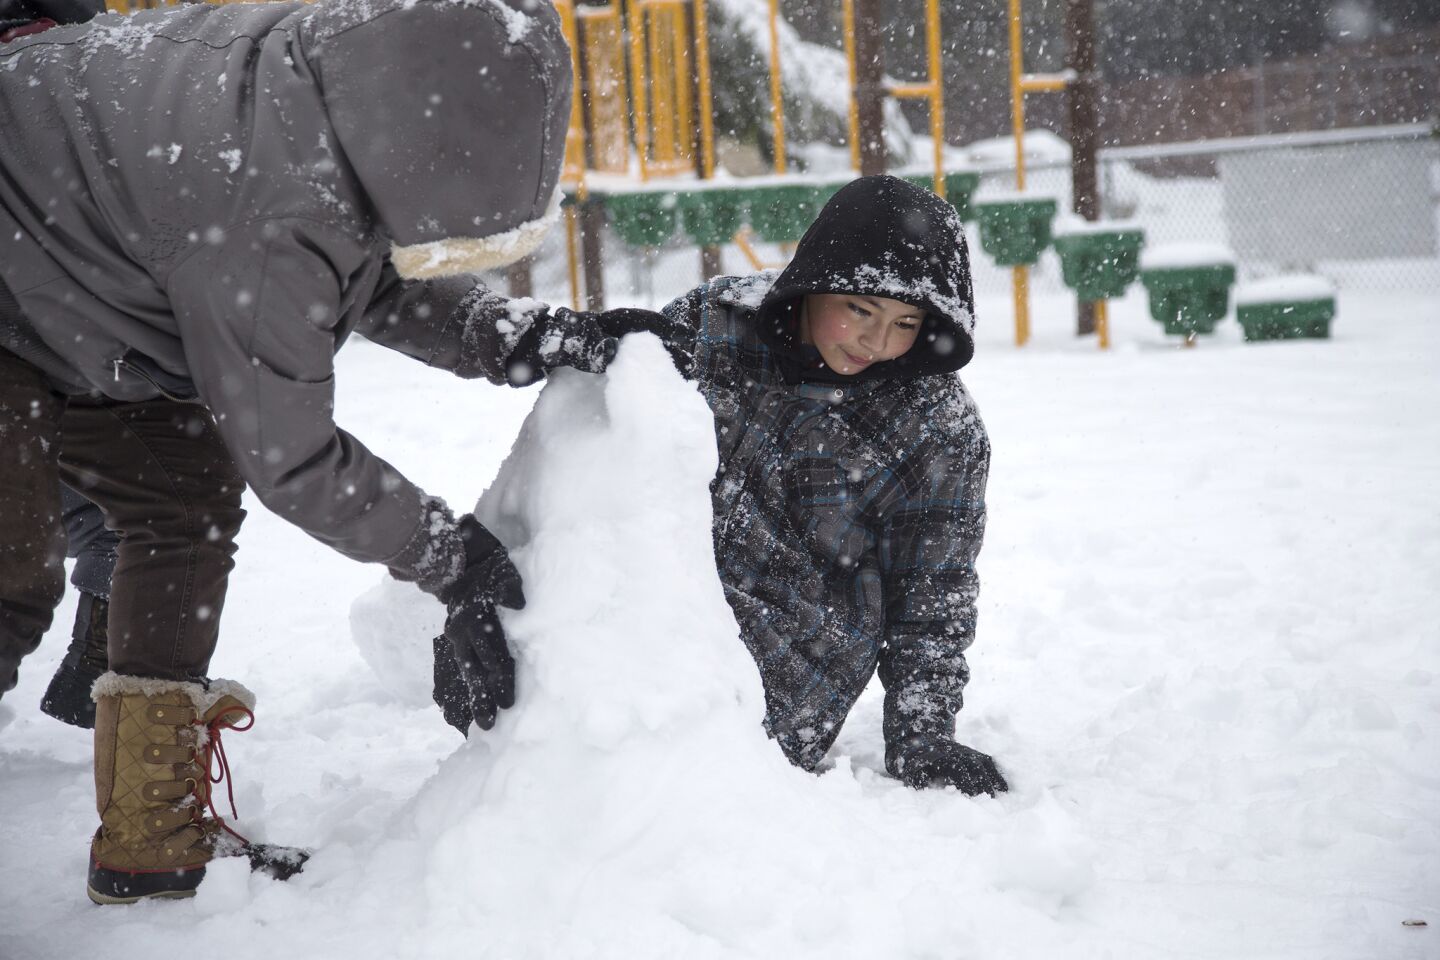 Jessica Pompa and Albert Arroyo make a snowman at Firehouse Park in Running Springs.